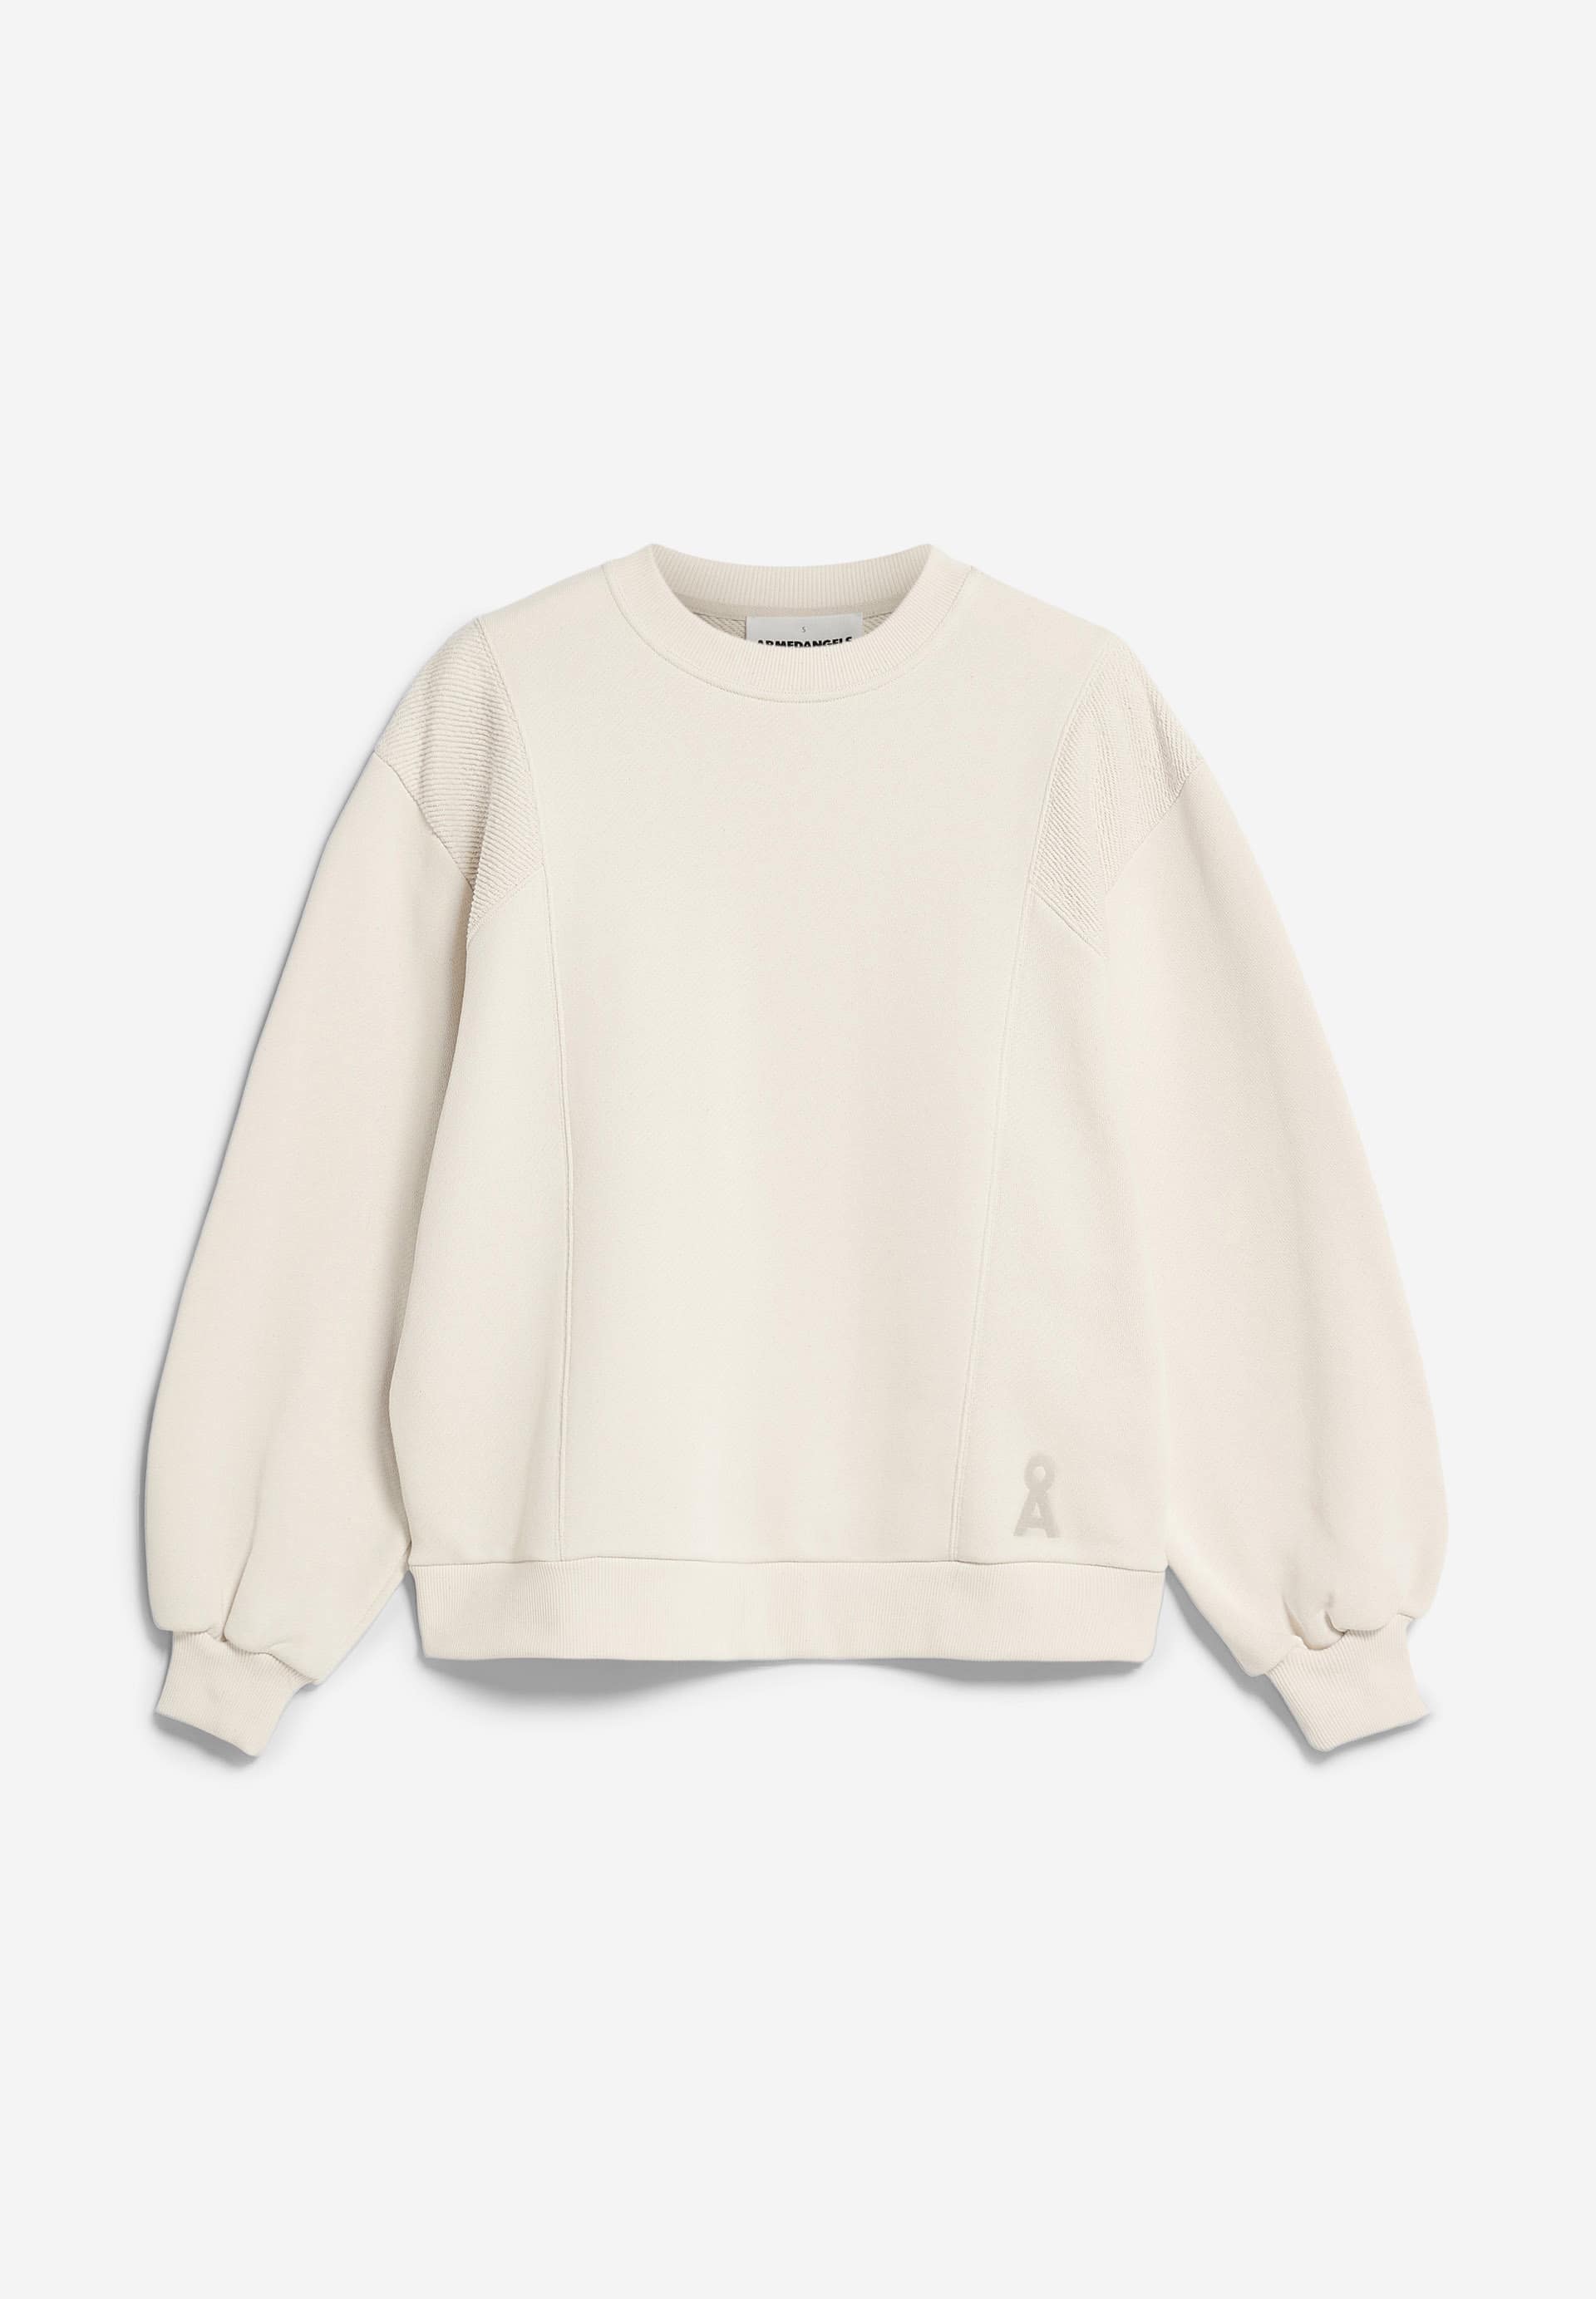 WINONAA Sweatshirt Relaxed Fit made of Organic Cotton